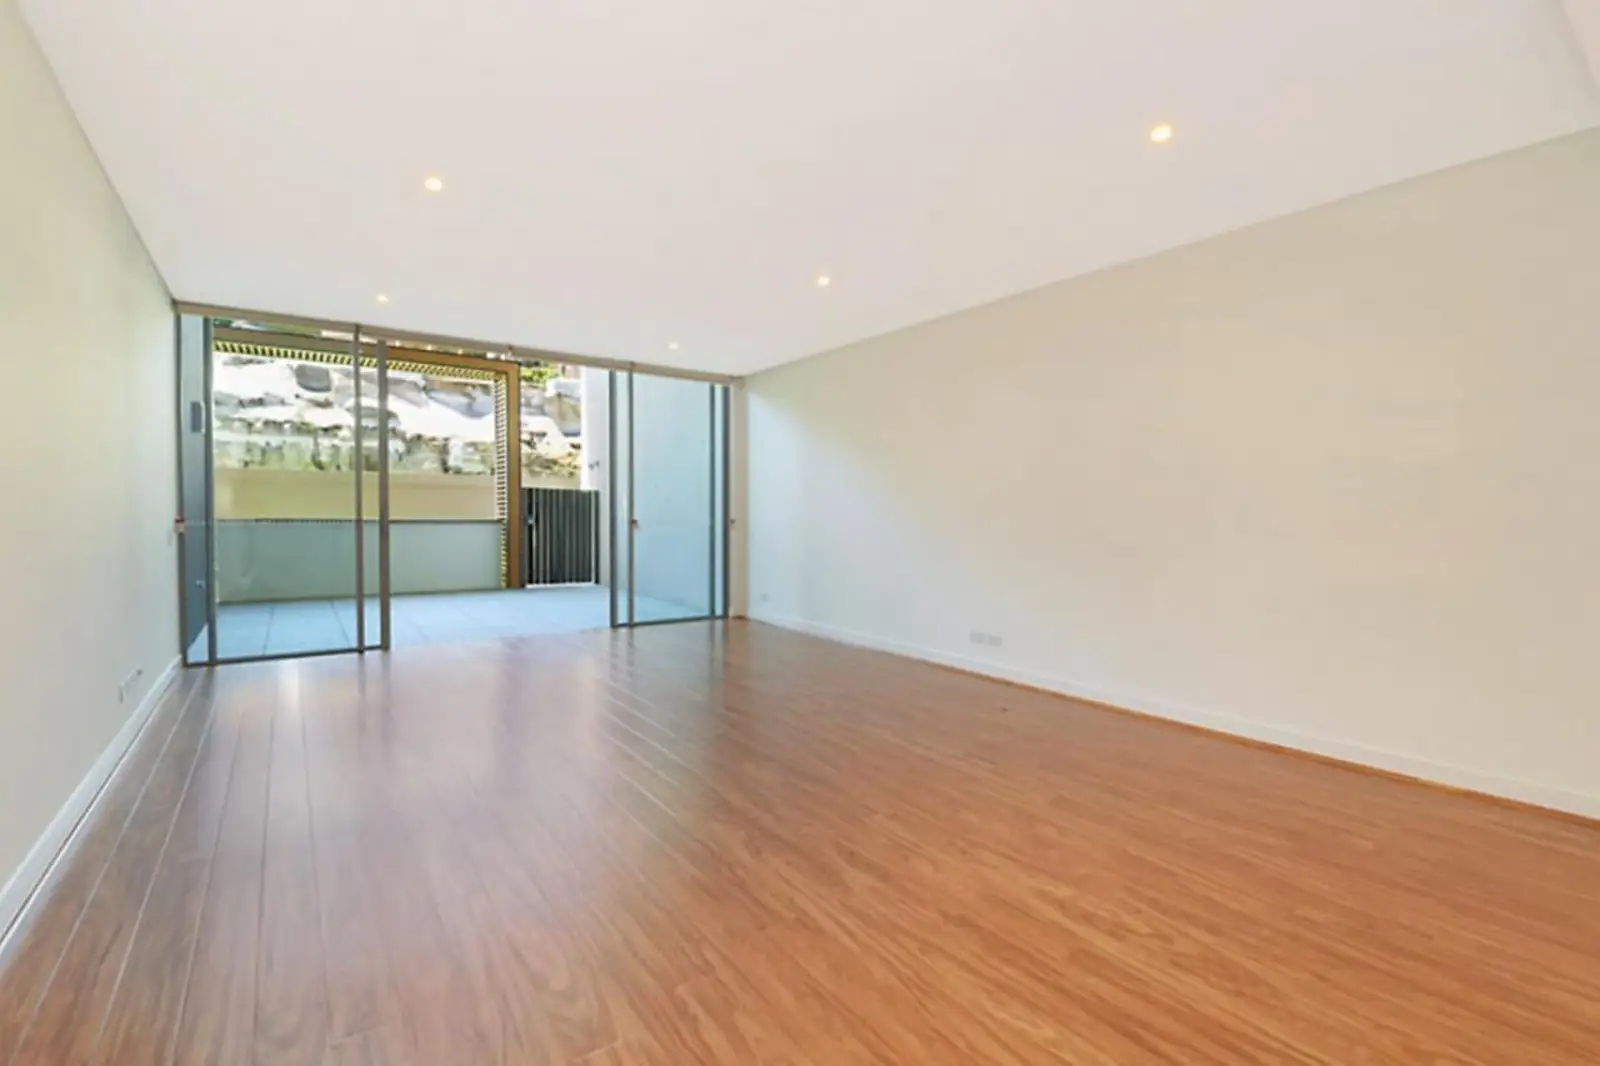 107 Ross Street, Forest Lodge Leased by Sydney Sotheby's International Realty - image 2